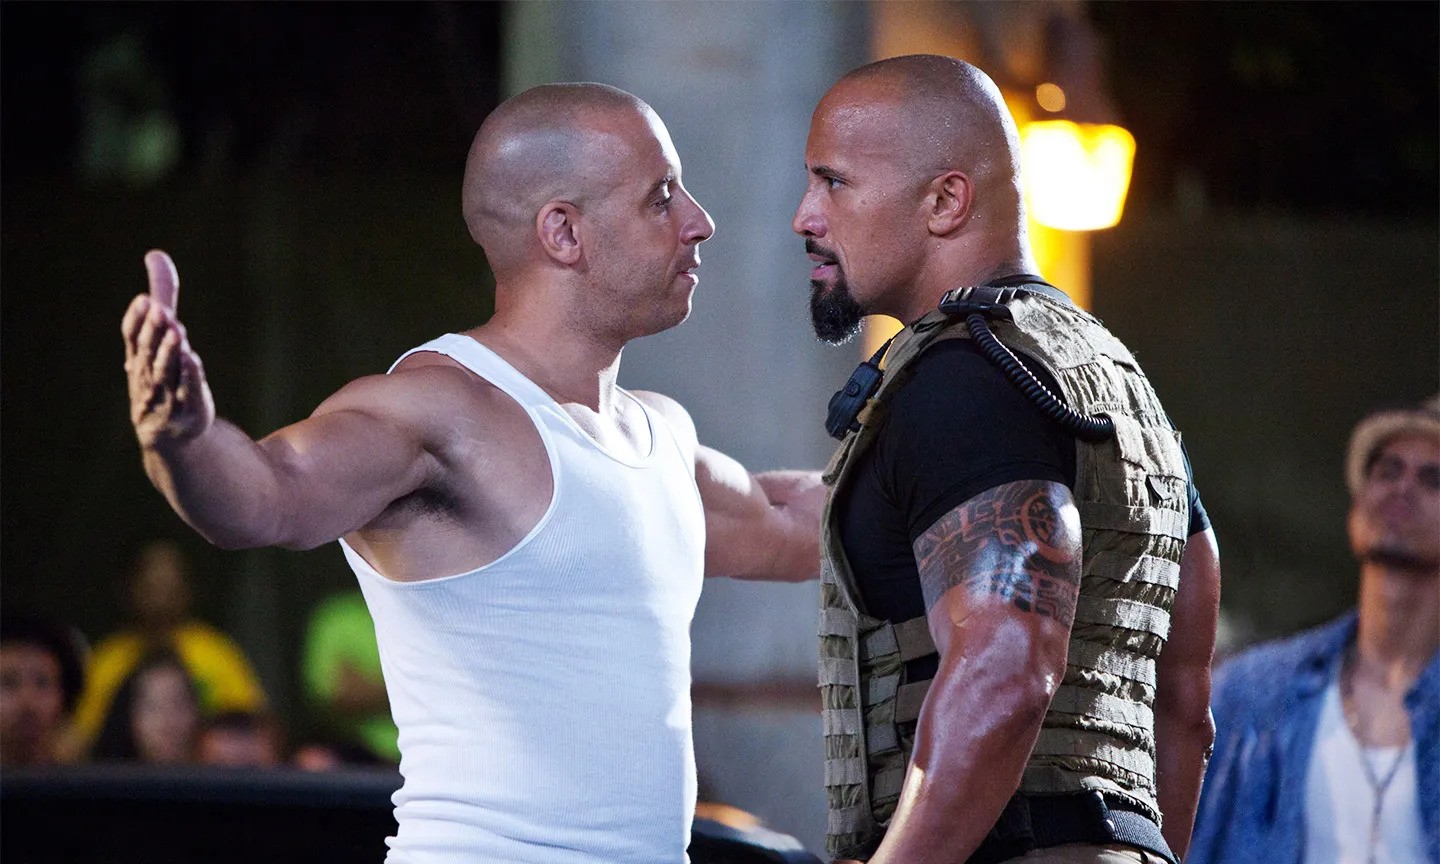 Vin Diesel and The Rocks feud shows no sign of cooling down